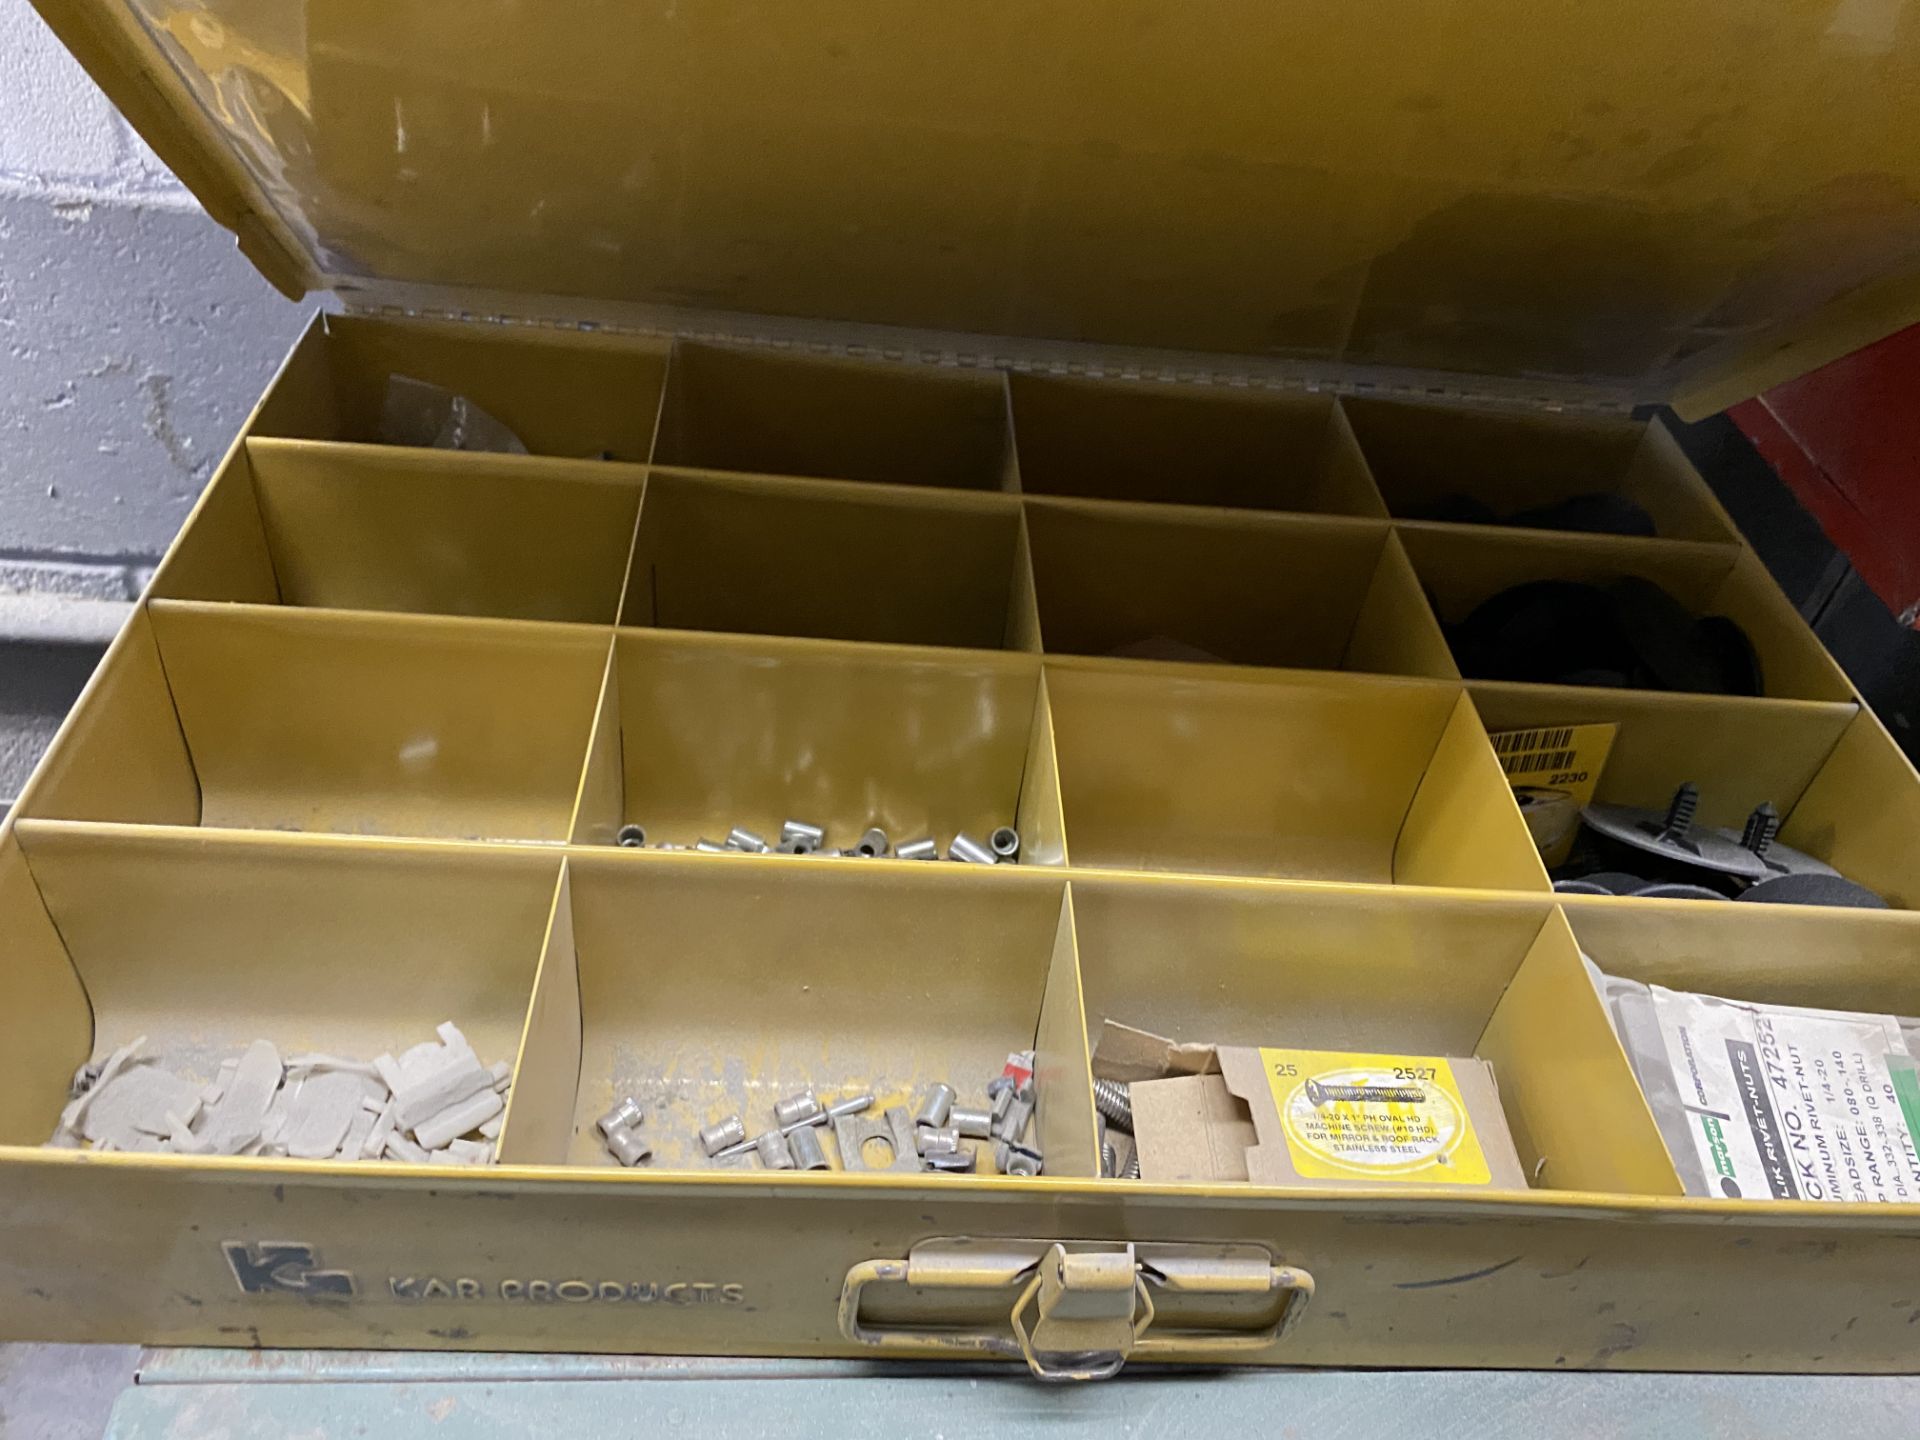 {LOT} Asst. Kits w/Hardware, Bulbs, Body Panel Fasteners, With Cabinets Etc. - Image 22 of 25